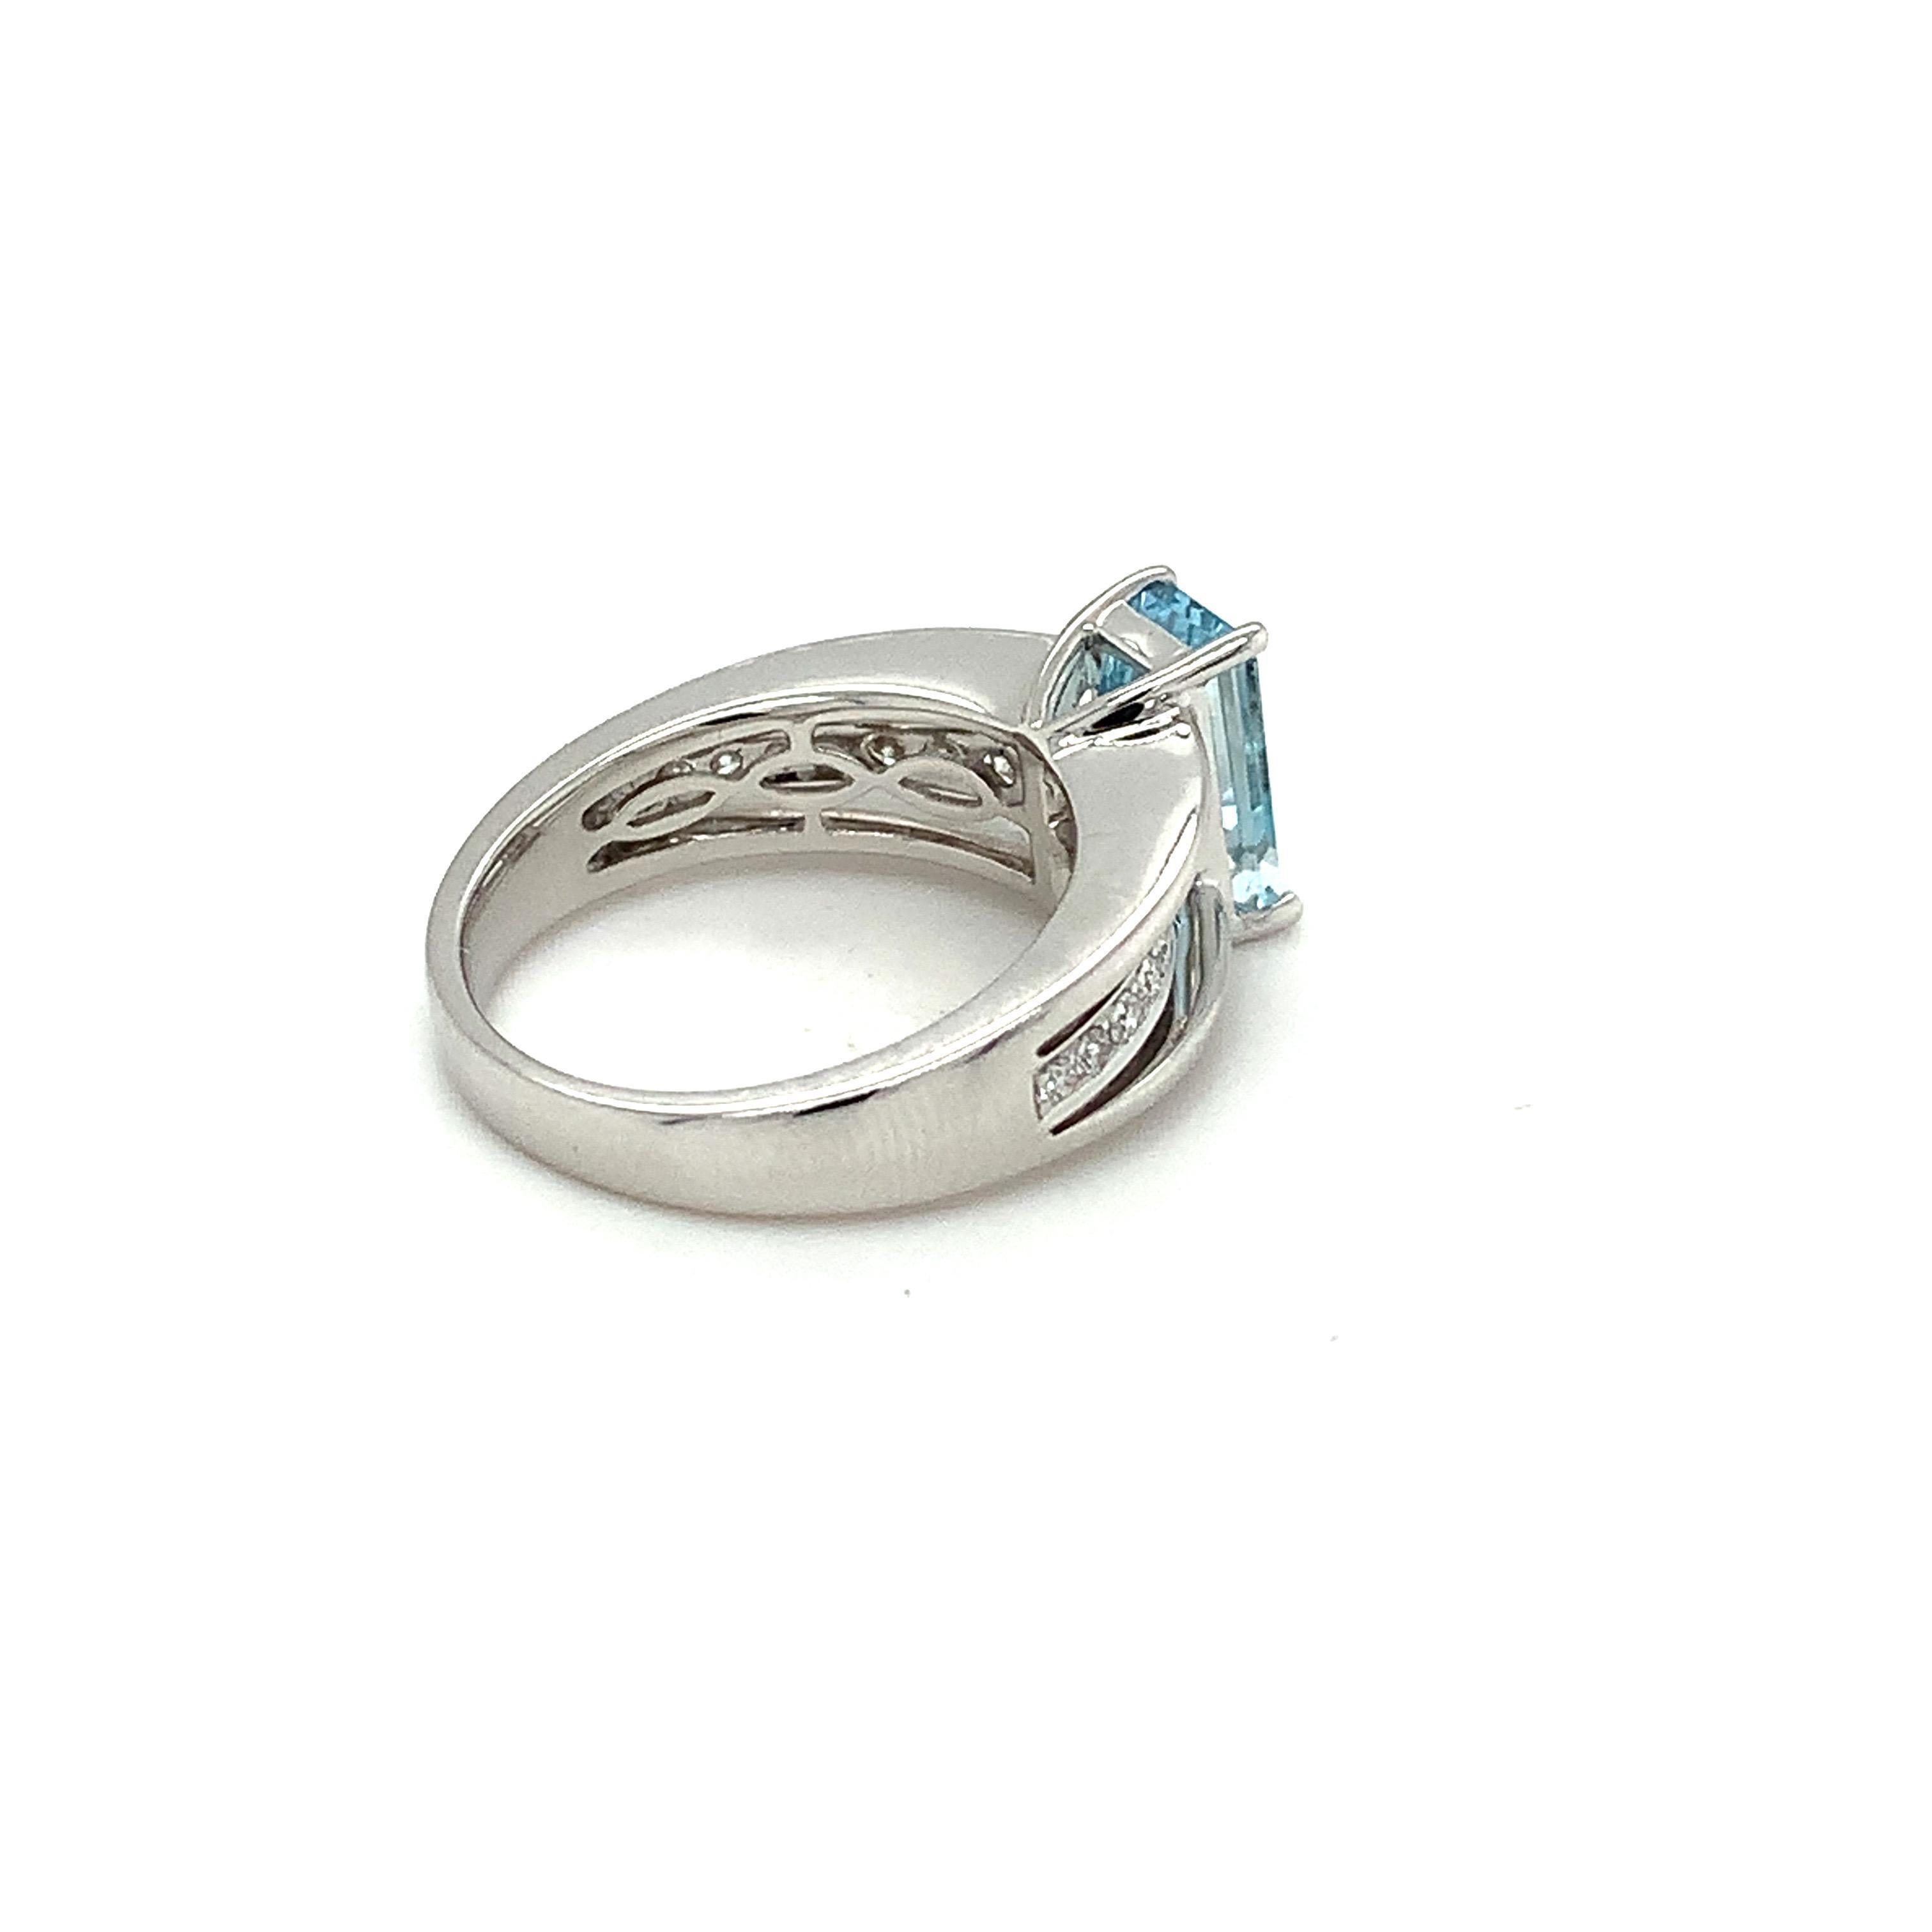 1.8 Carat Aquamarine Diamond White Gold Ring  In New Condition For Sale In Trumbull, CT